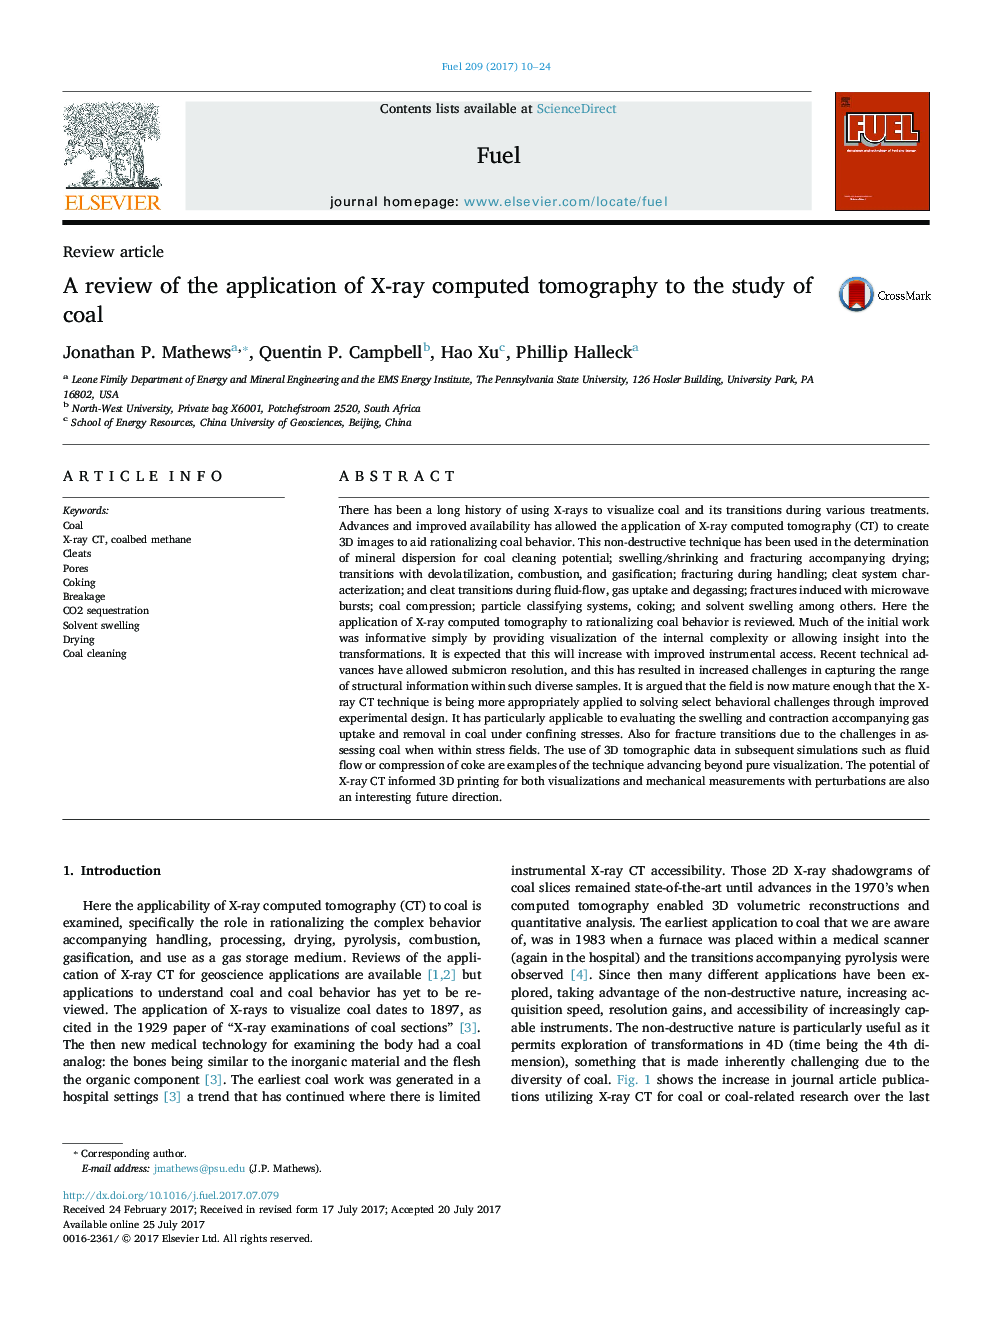 A review of the application of X-ray computed tomography to the study of coal